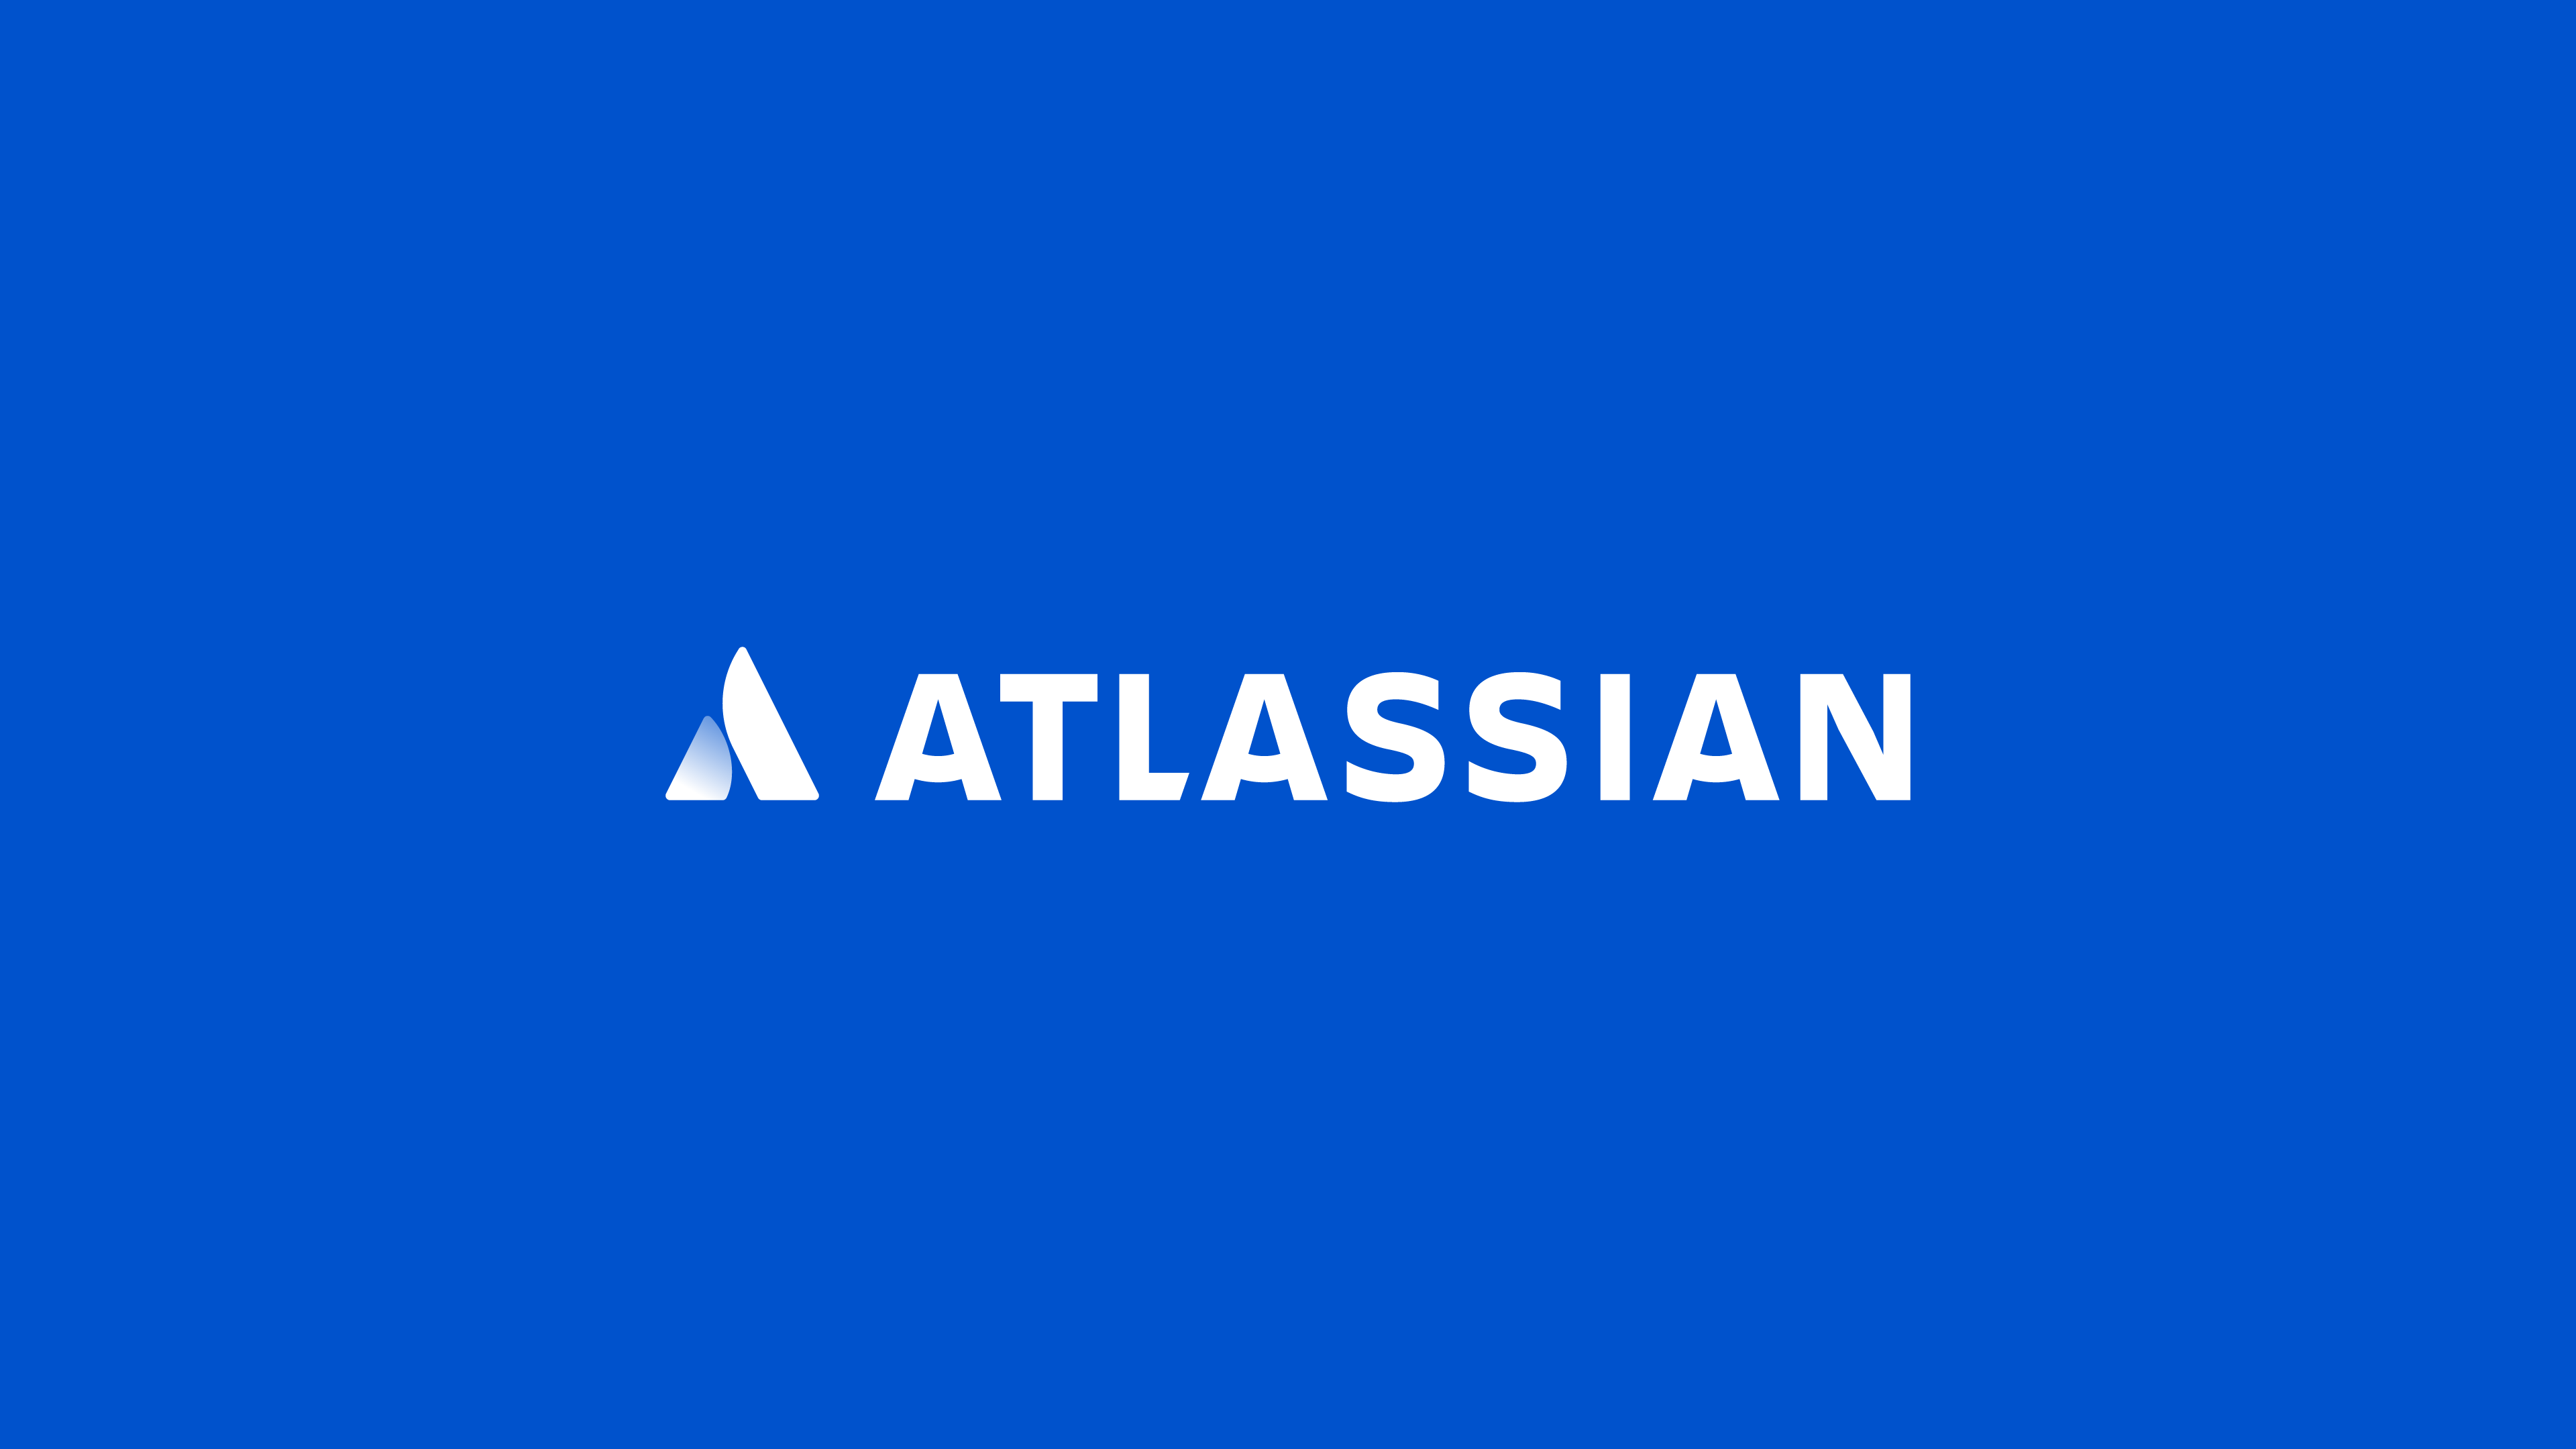 Atlassian Has Strong Pricing Power And Critical Product Innovation. Analyst Sees More Than 50% Upside Due To This Competitive Advantage